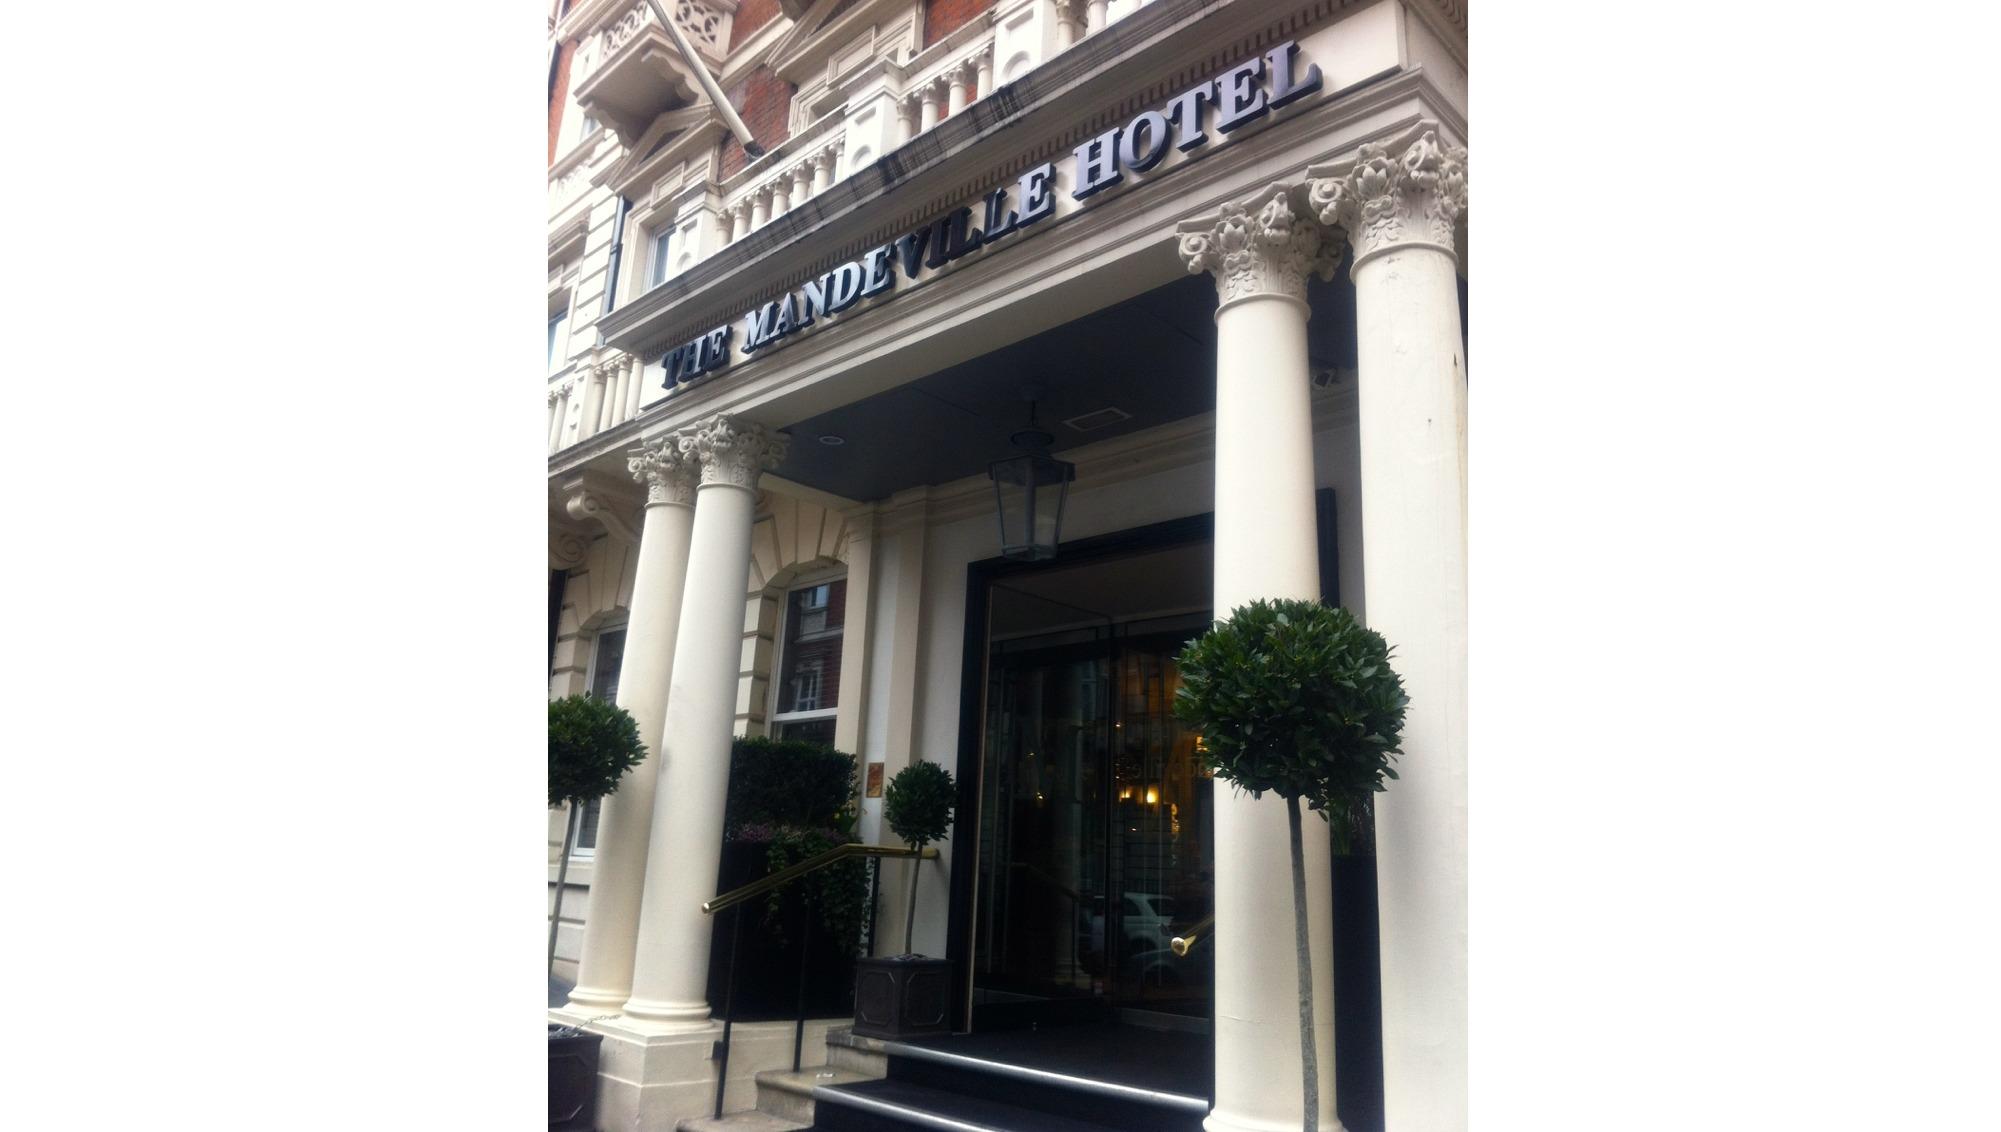 The Mandeville Hotel, The Boadroom photo #2